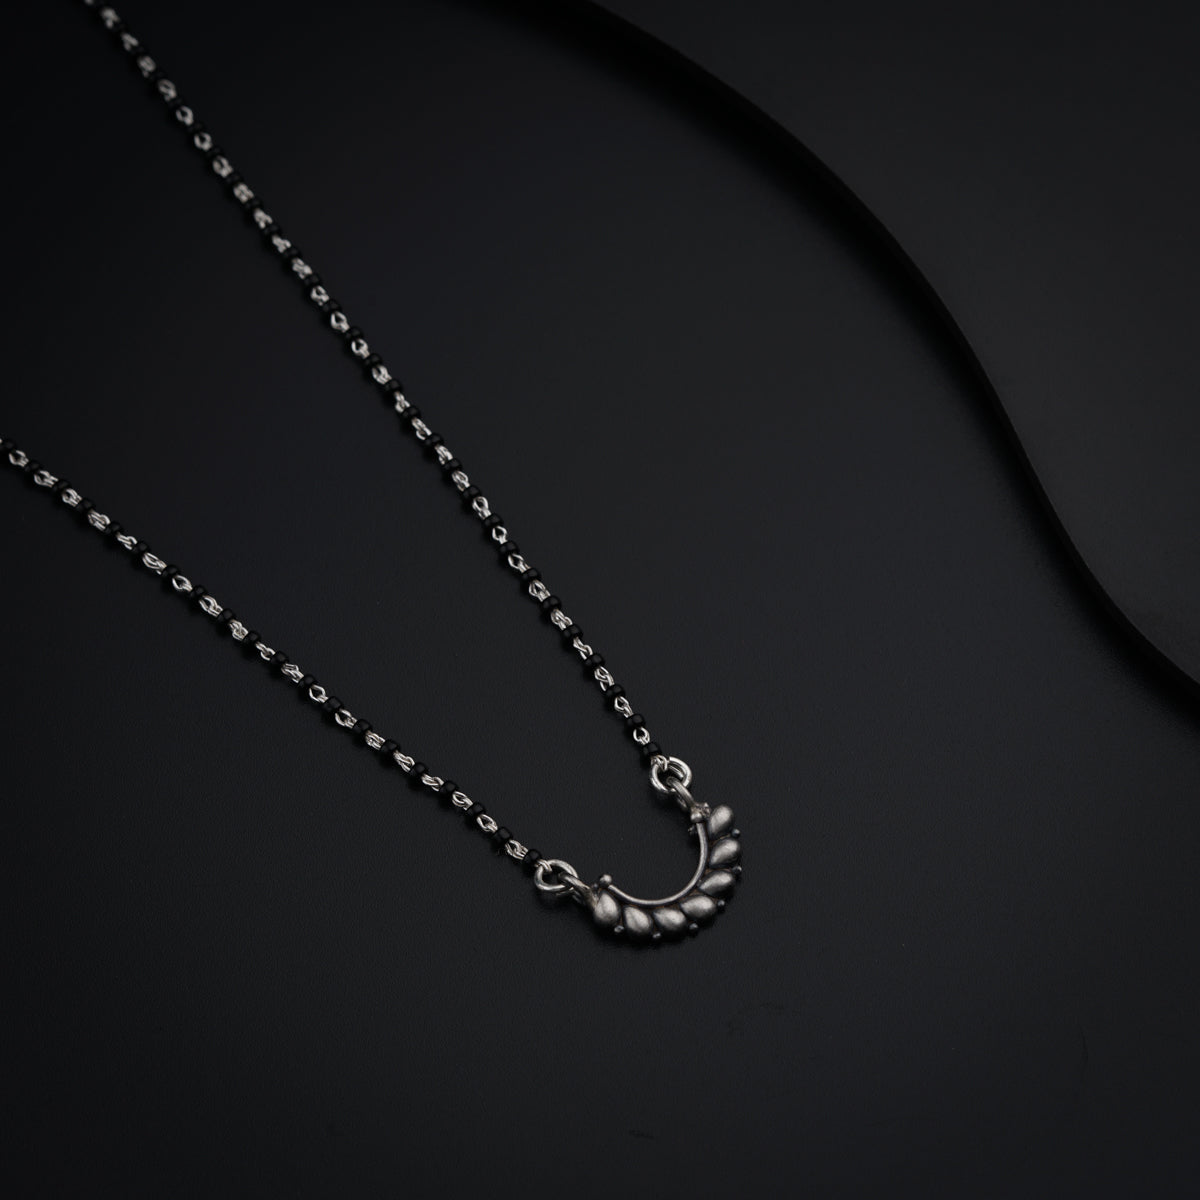 a necklace with a flower on it on a black surface